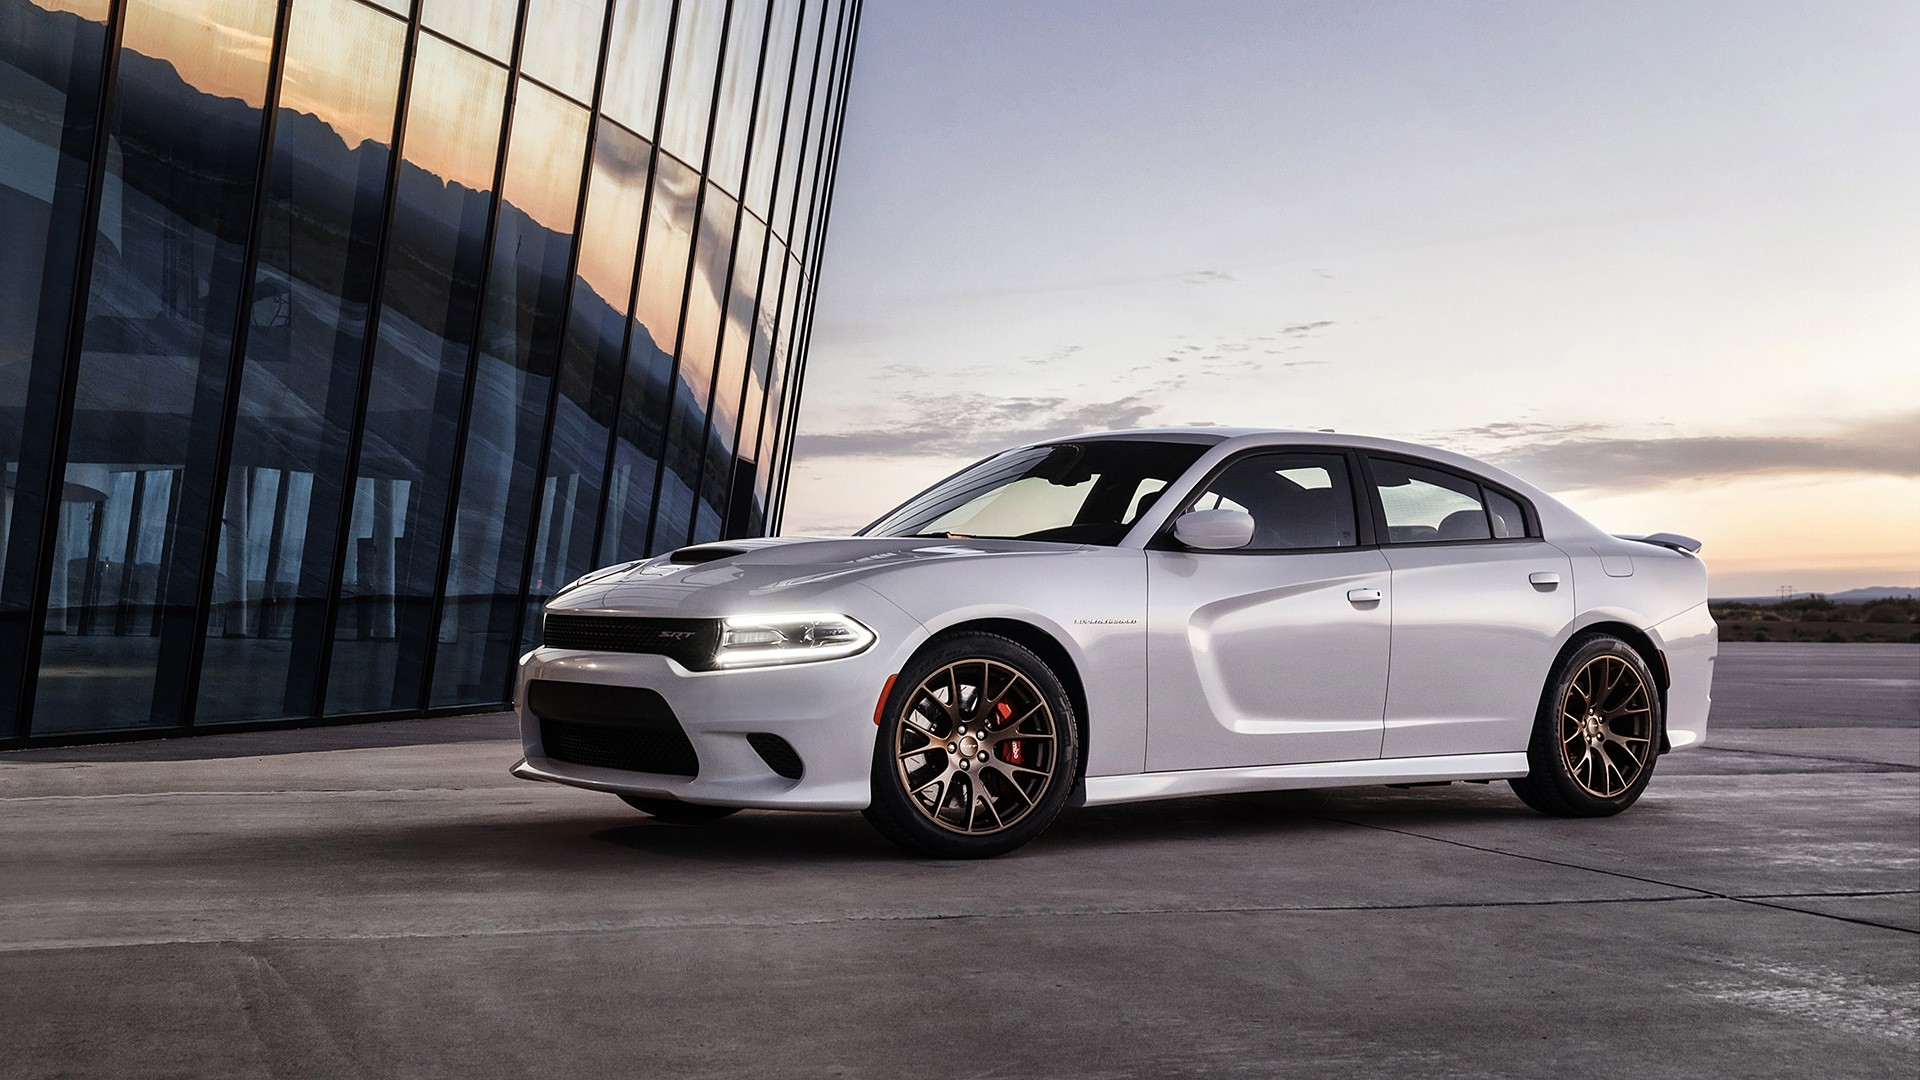 Charger Hellcat Wallpaper theme